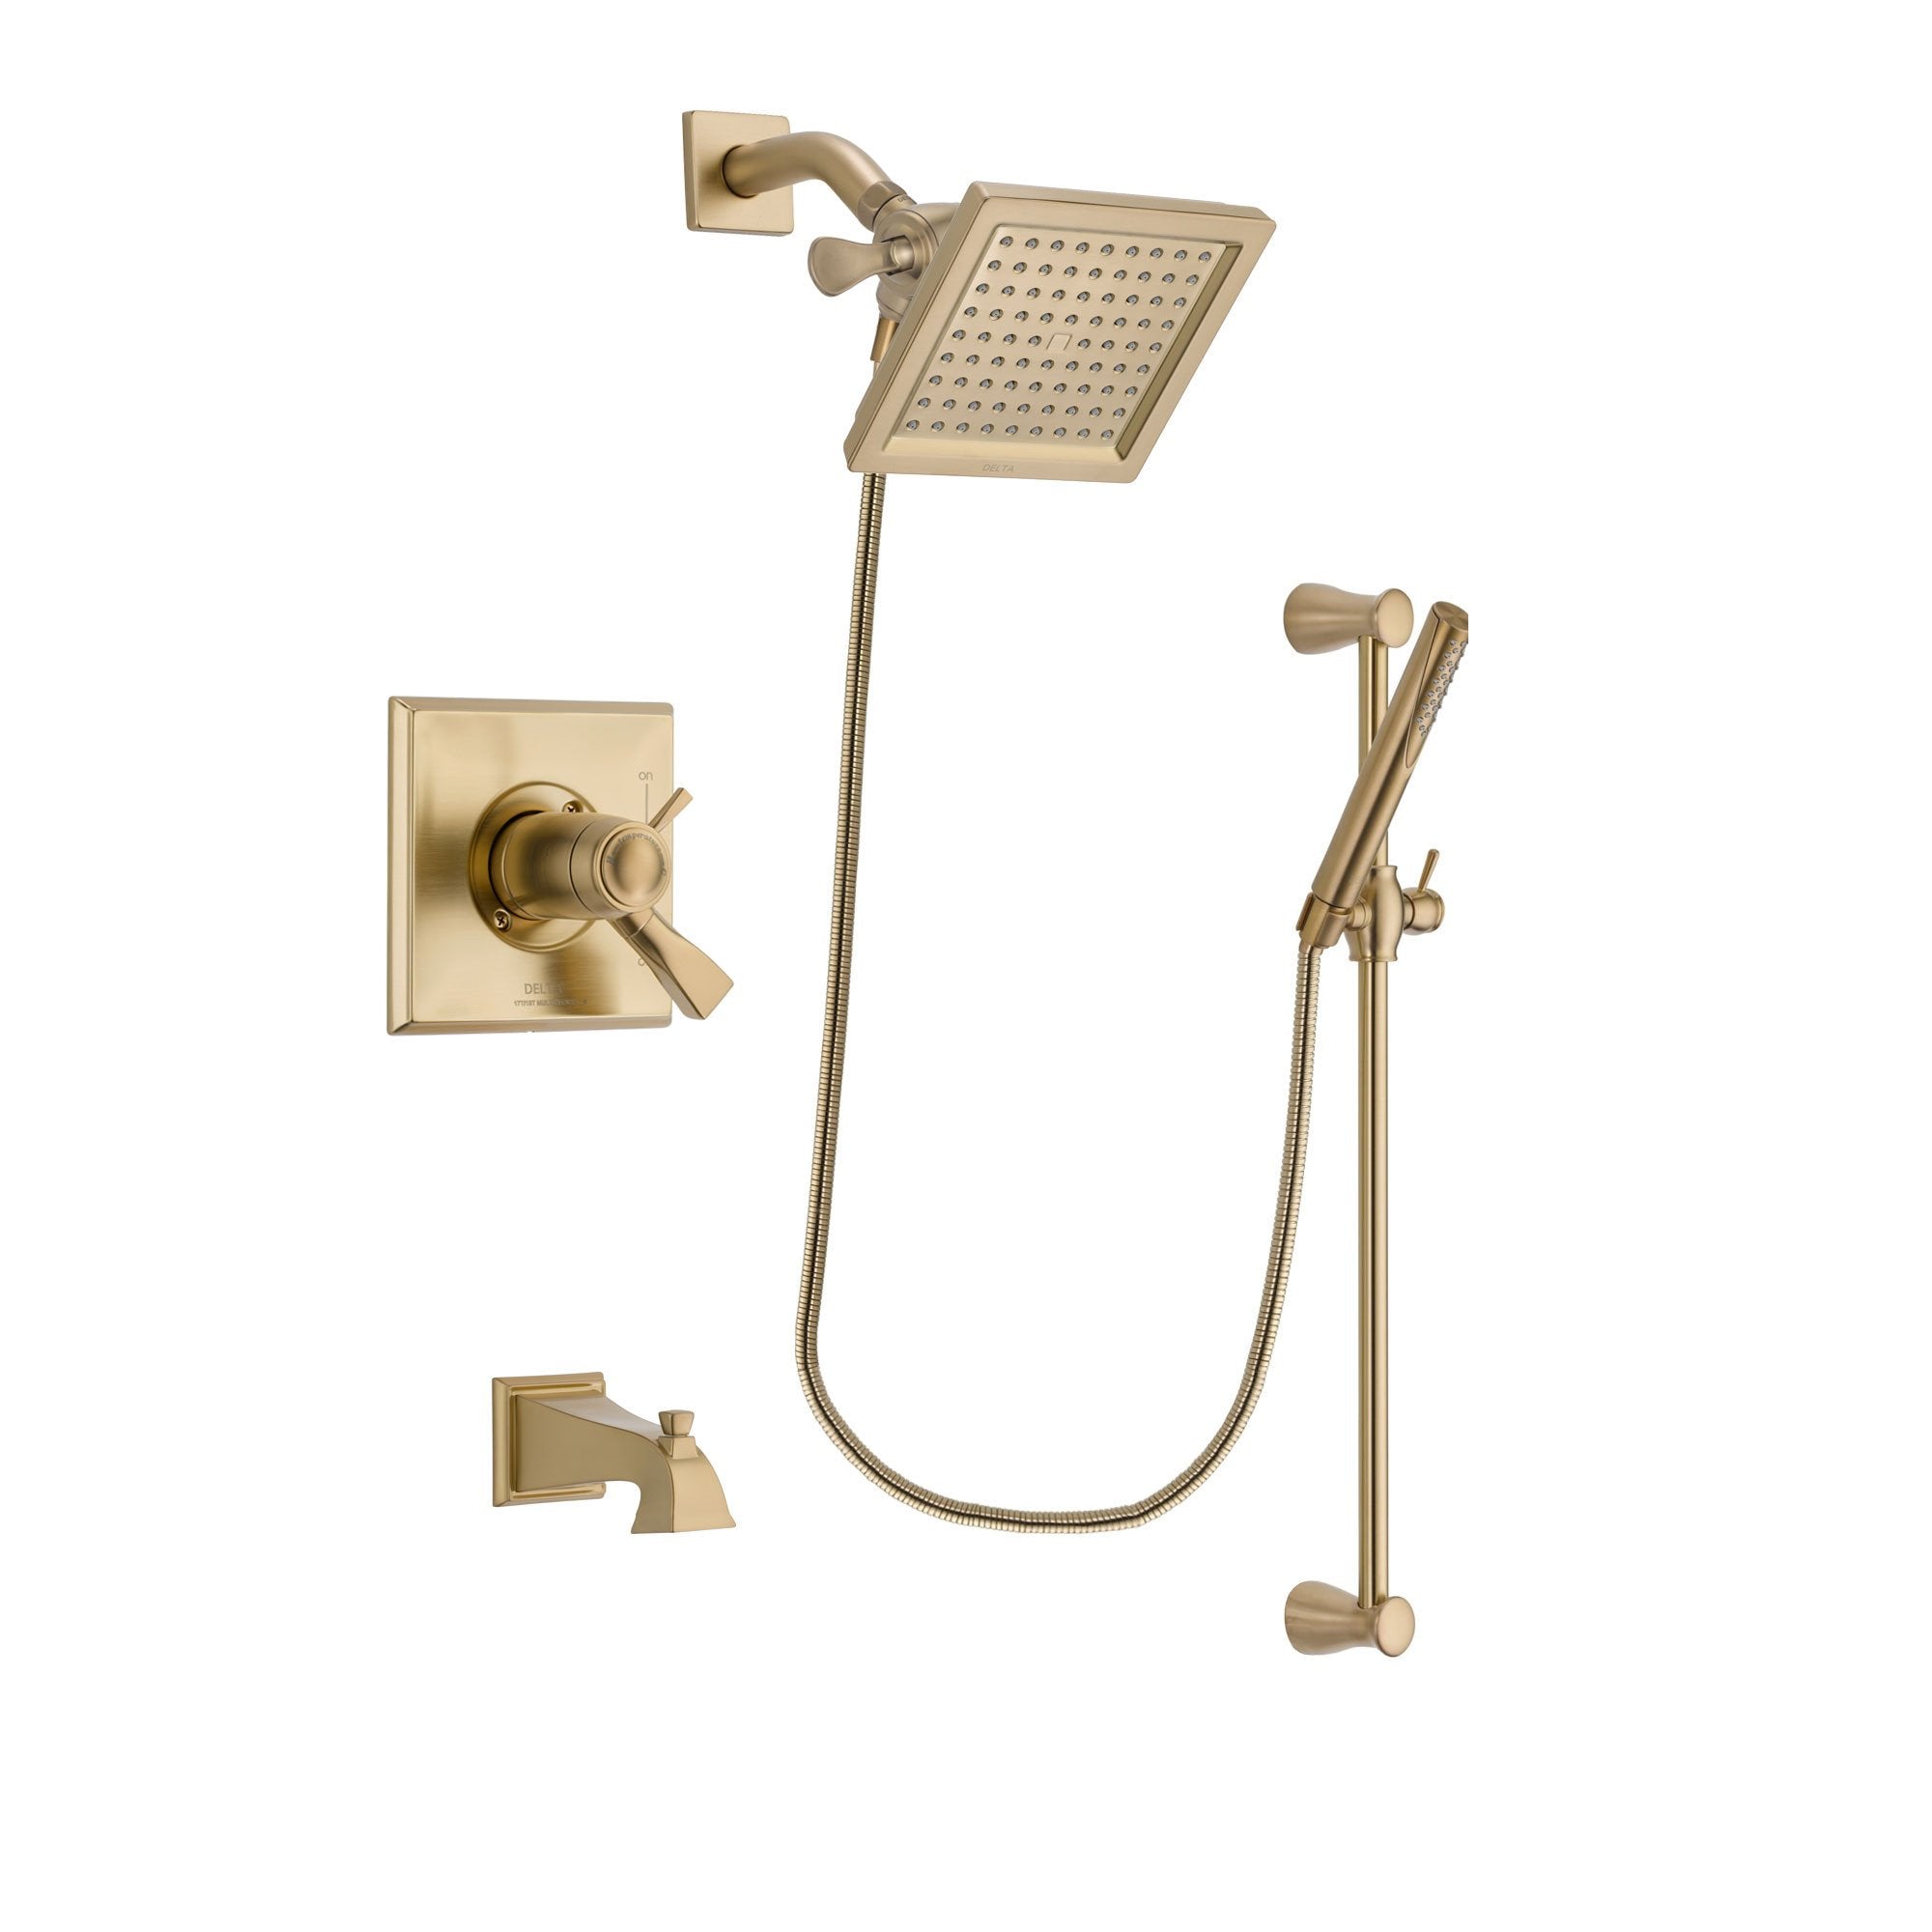 Delta Dryden Champagne Bronze Finish Thermostatic Tub and Shower Faucet System Package with 6.5-inch Square Rain Showerhead and Modern Handheld Shower with Slide Bar Includes Rough-in Valve and Tub Spout DSP3957V